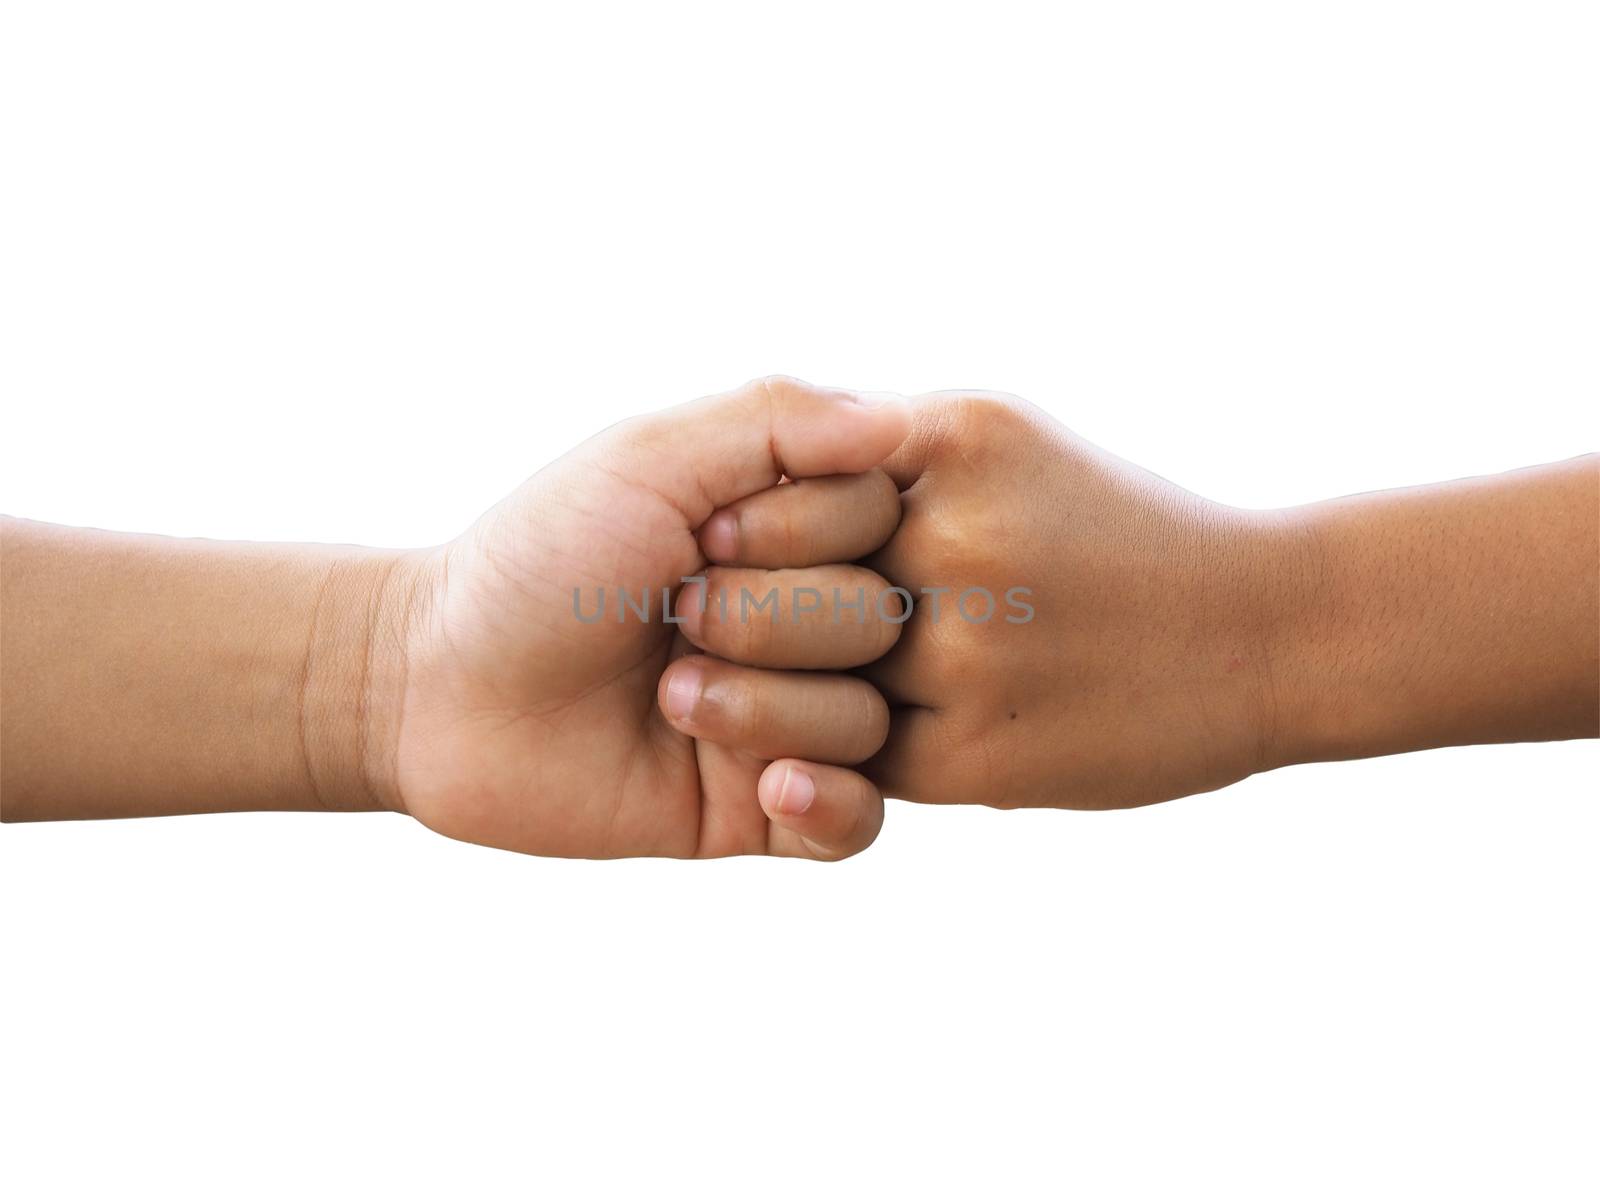 Boy  fist bumping On a white background.It is a new greeting dur by Unimages2527